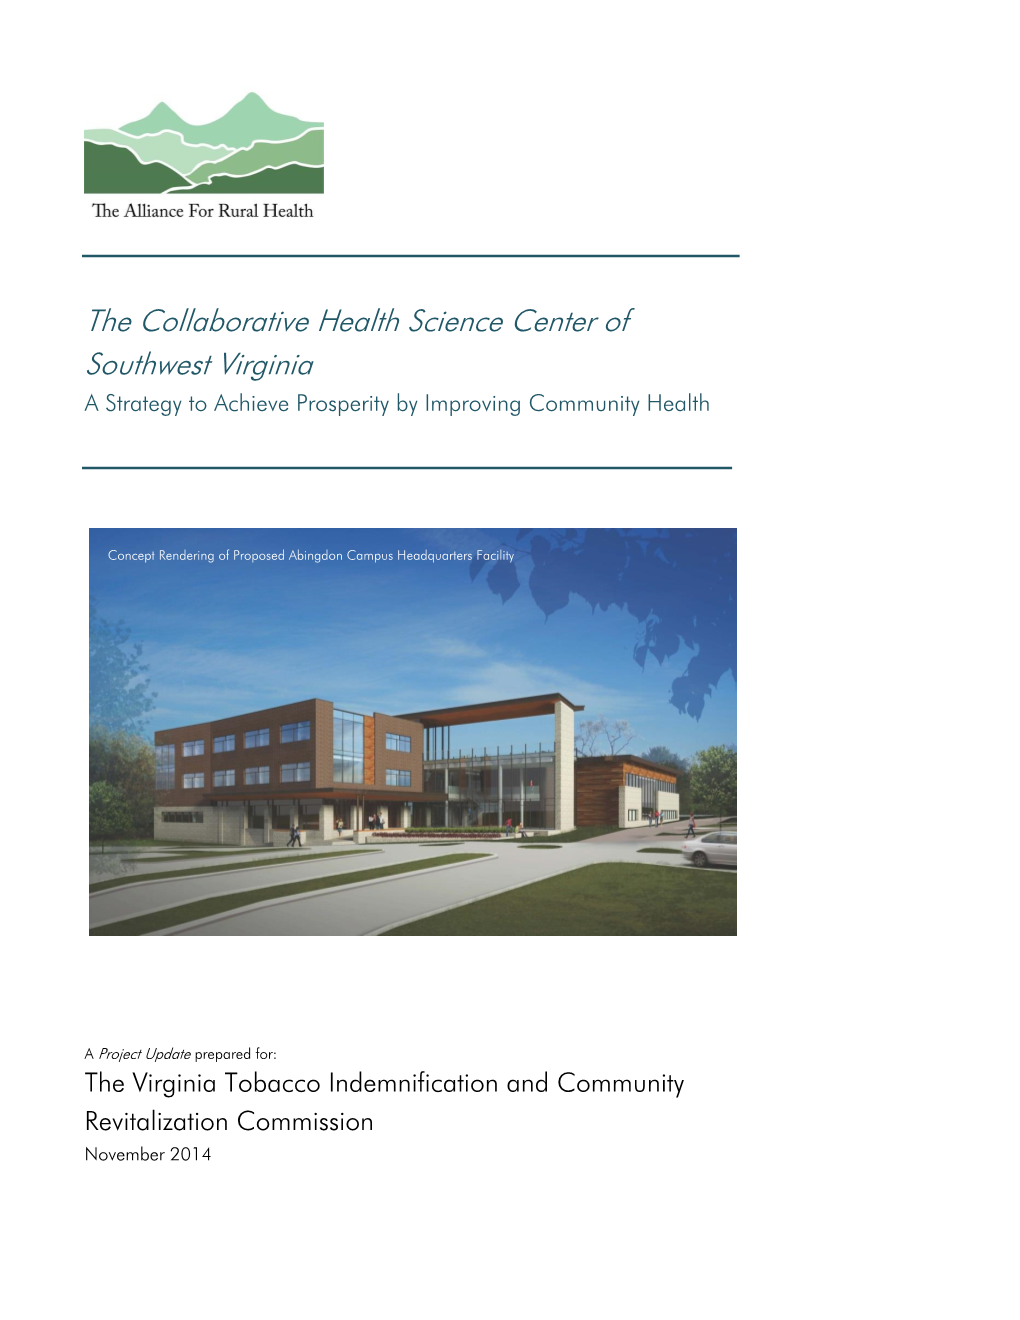 The Collaborative Health Science Center of Southwest Virginia a Strategy to Achieve Prosperity by Improving Community Health